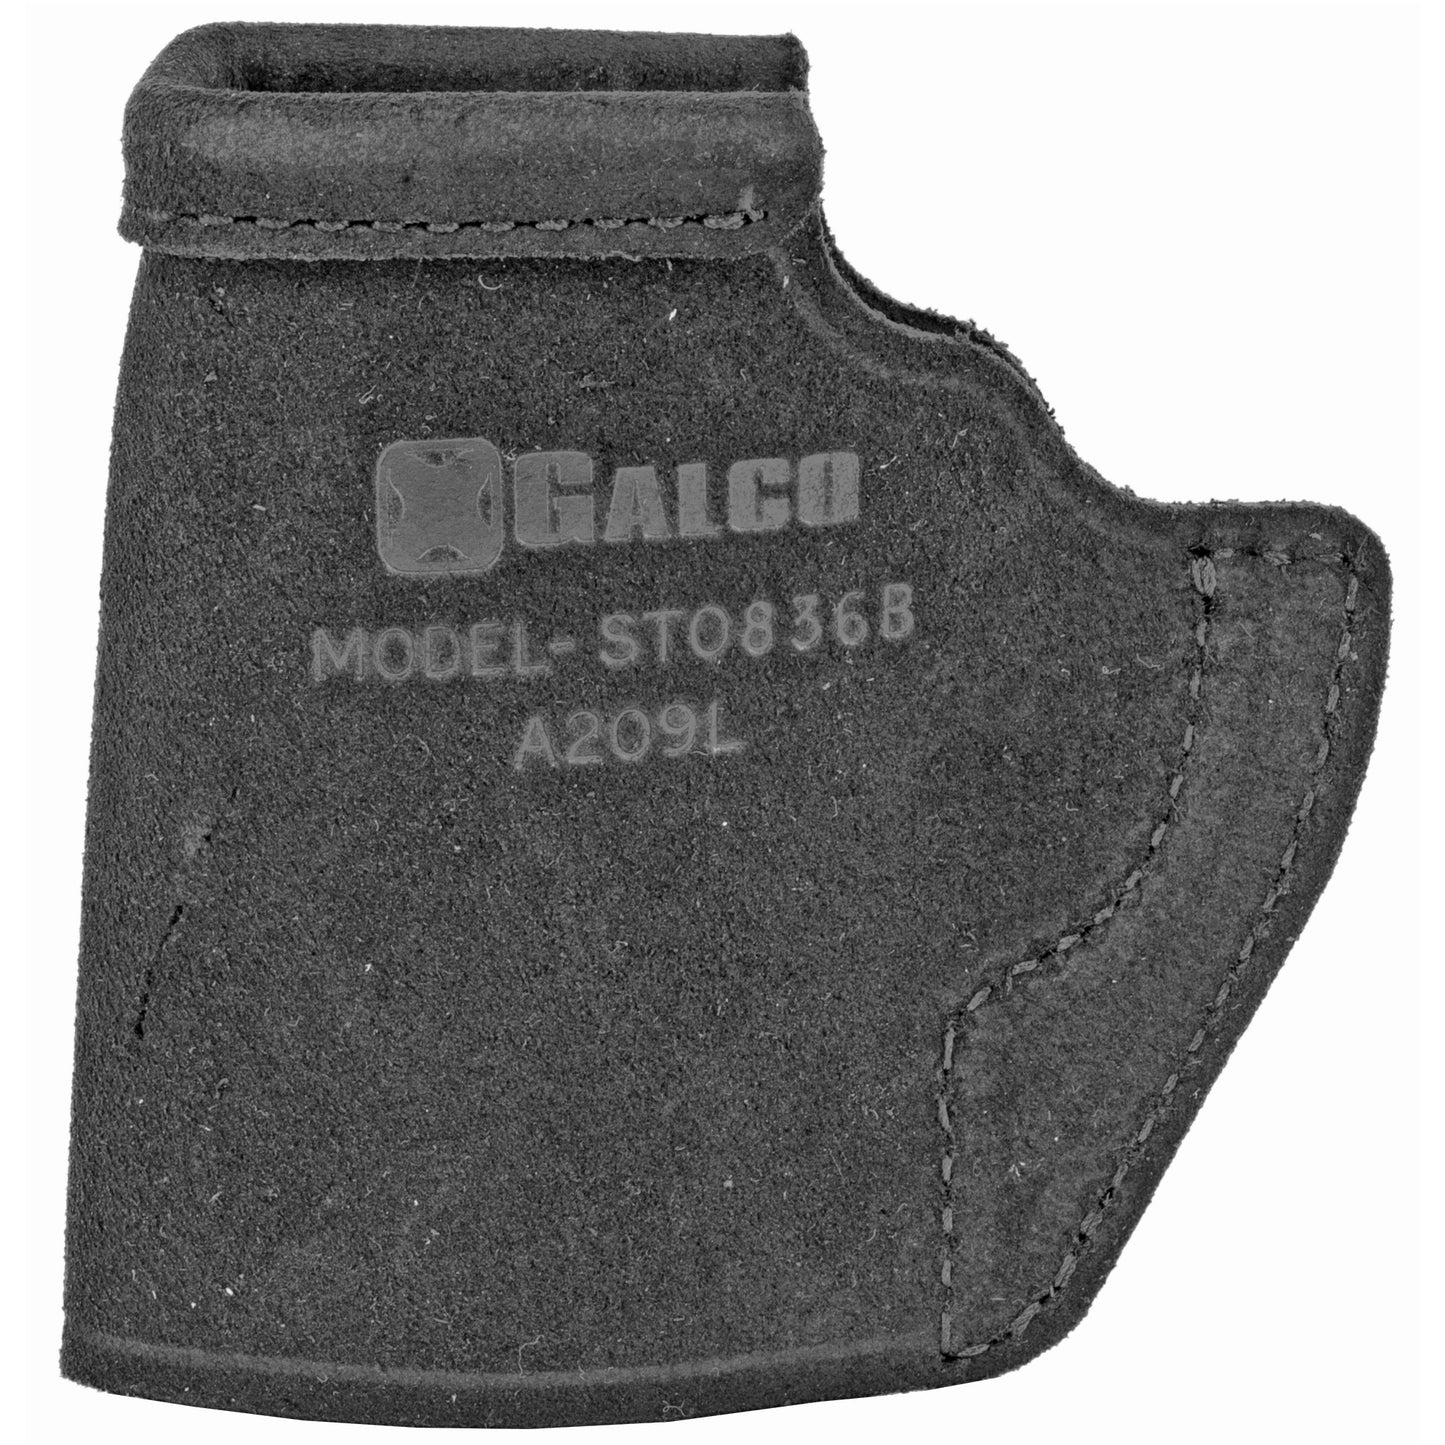 Galco STOW-N-GO Inside Pant Holster Fit Ruger LCP II Right Black Leather STO836B